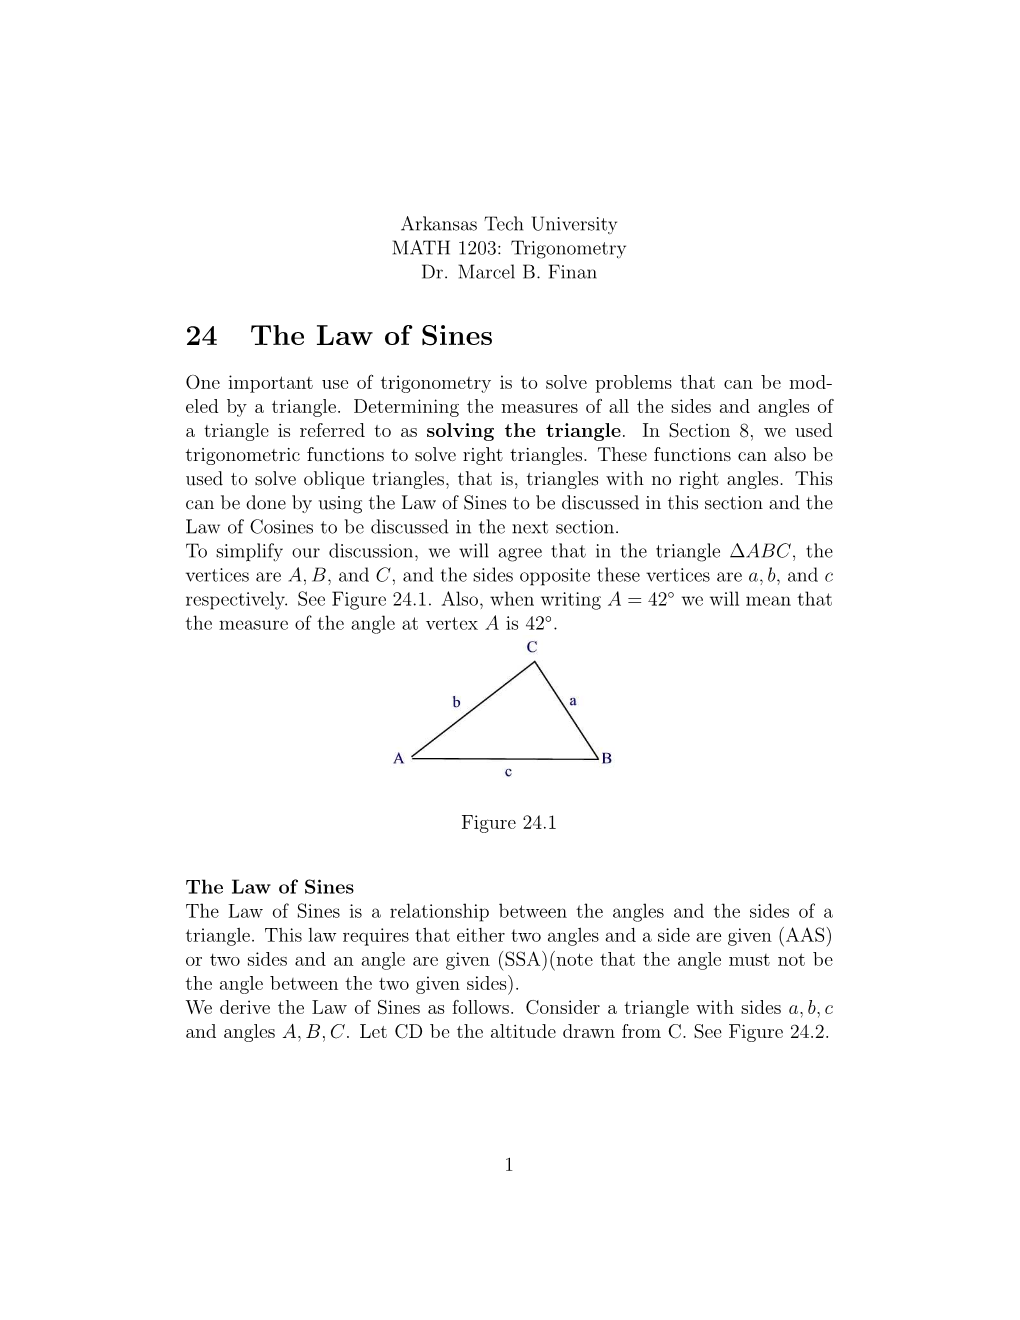 24 the Law of Sines